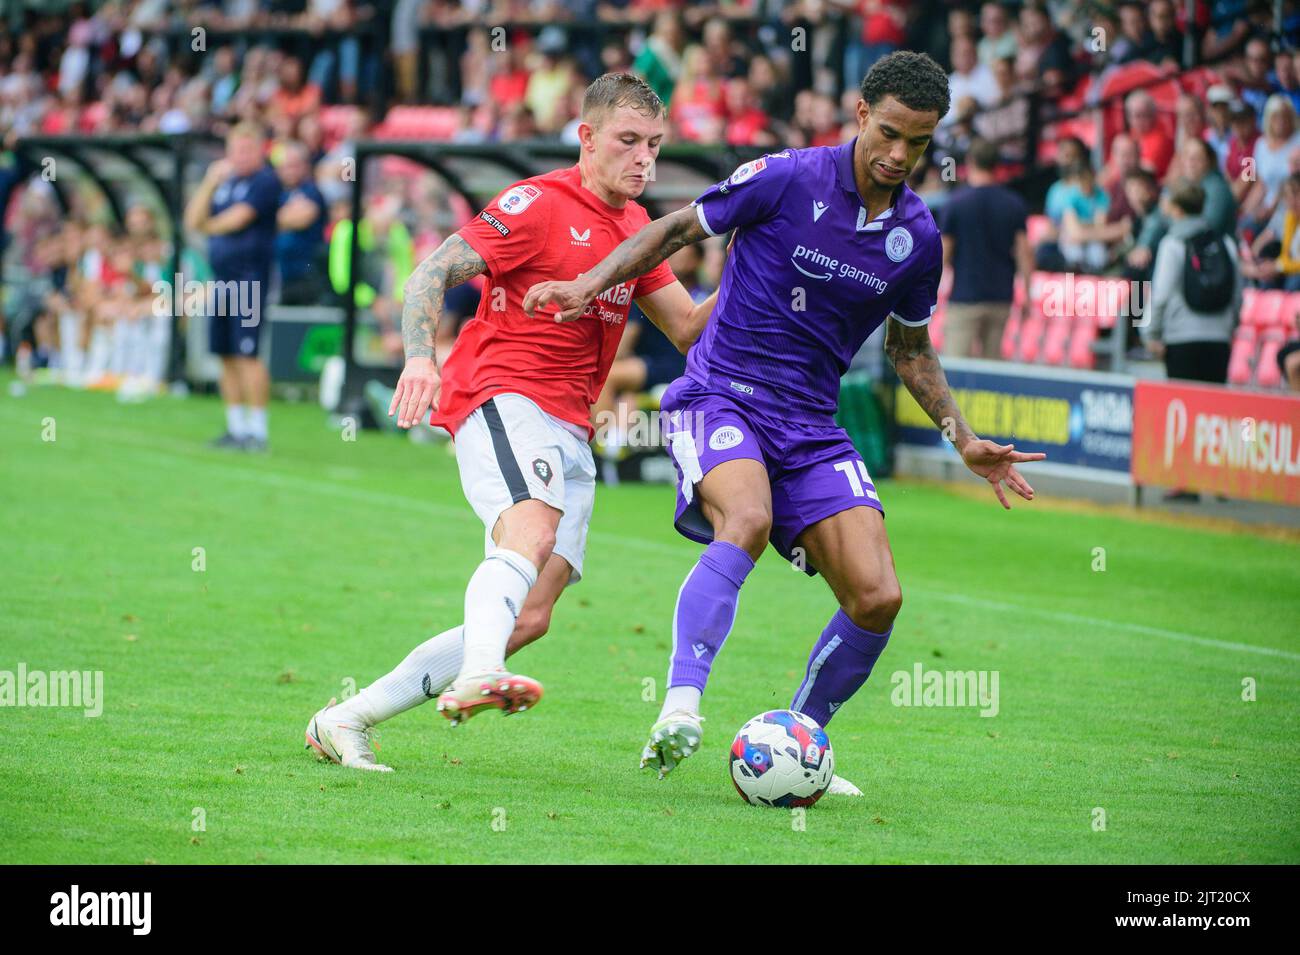 Callum Hendry of Salford City tackles Terence Vancooten of Stevenage FC during the Sky Bet League 2 match between Salford City and Stevenage at Moor Lane, Salford on Saturday 27th August 2022. (Credit: Ian Charles | MI News) Credit: MI News & Sport /Alamy Live News Stock Photo